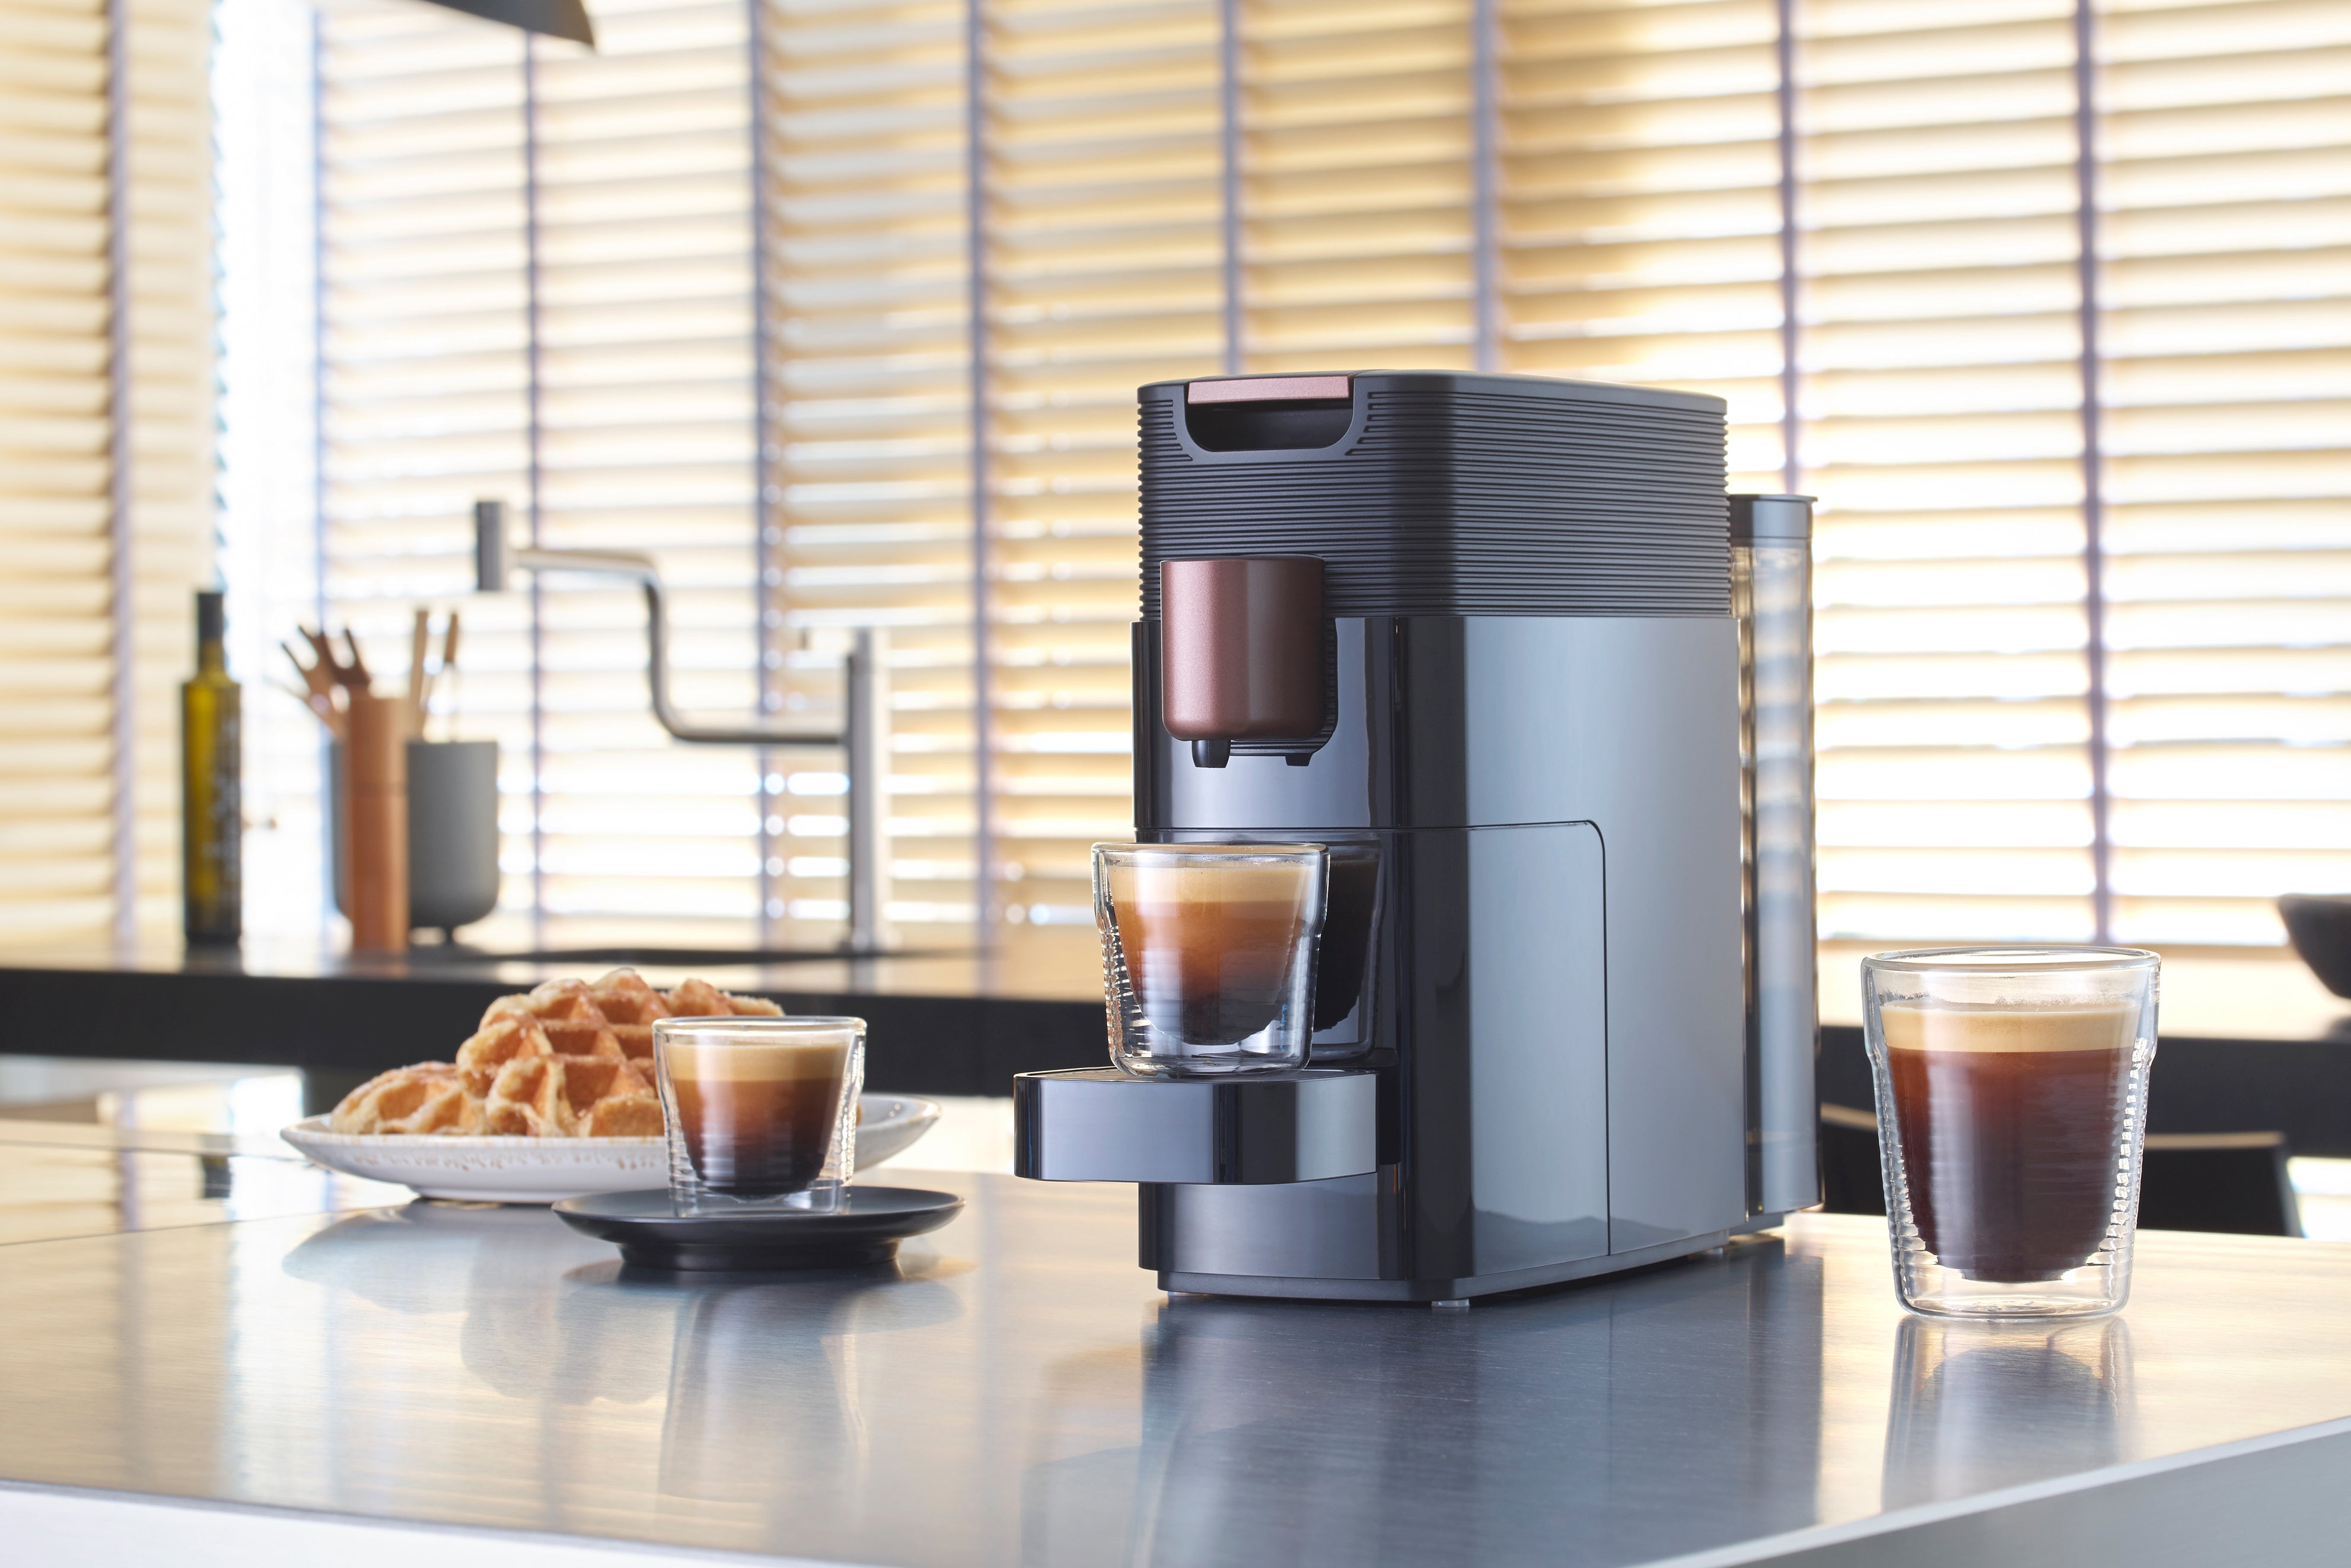  3-in-1 Coffee Maker for Nespresso, K-Cup Pod and